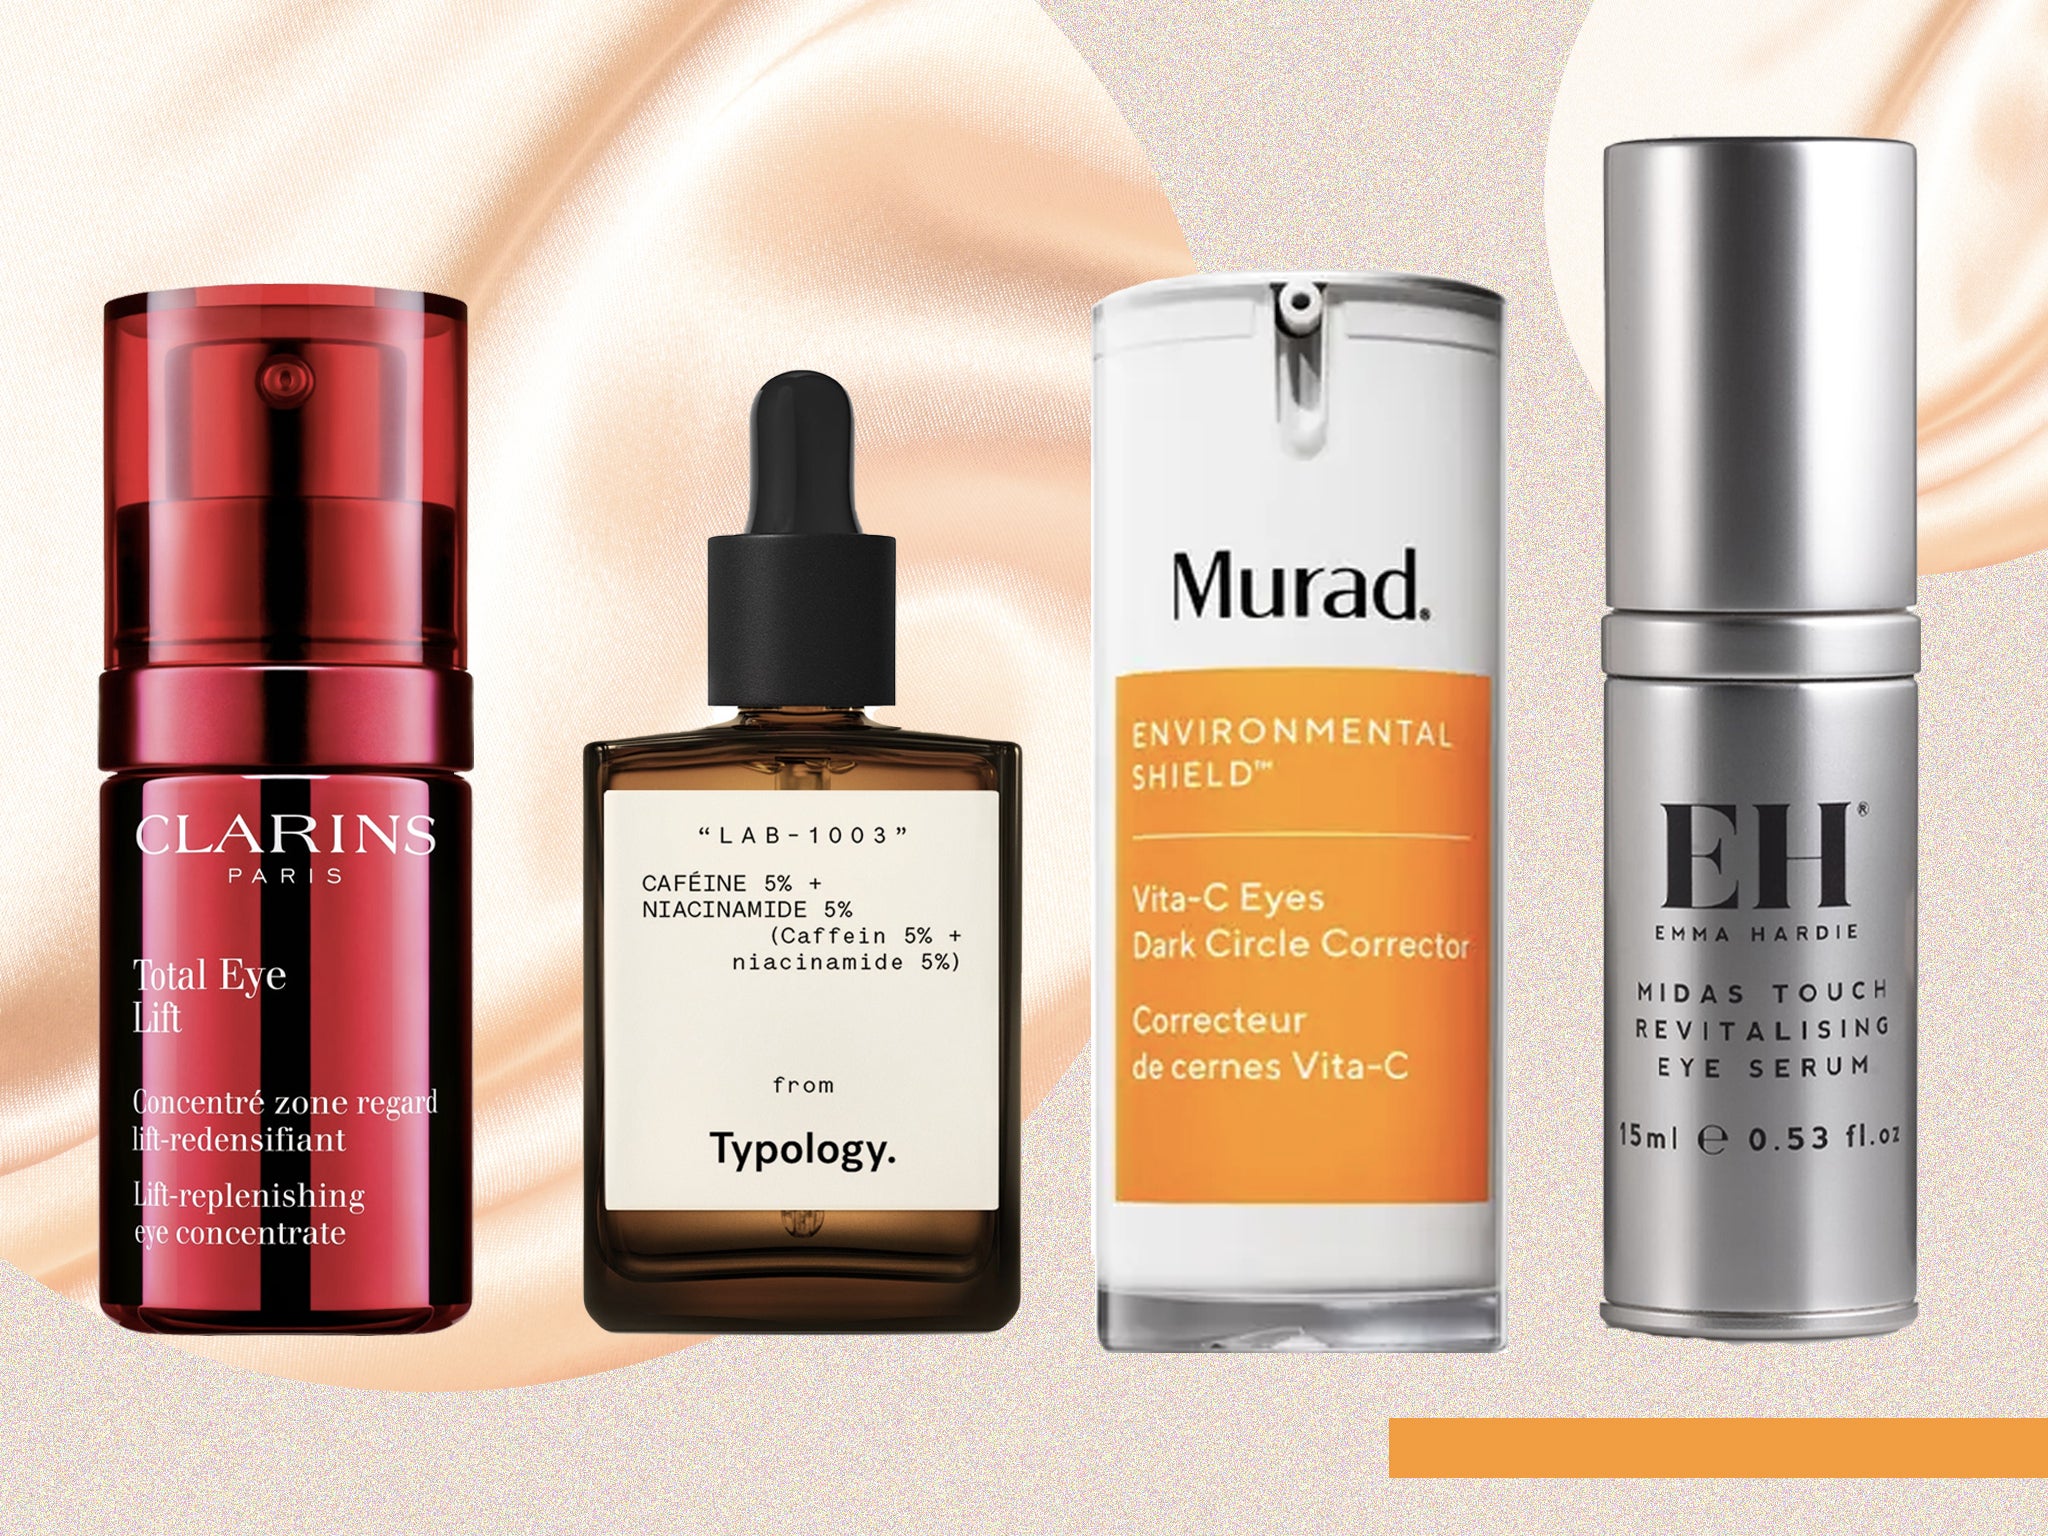 With lightweight textures and rejuvenating properties, eye serums make a great upgrade to your usual routine